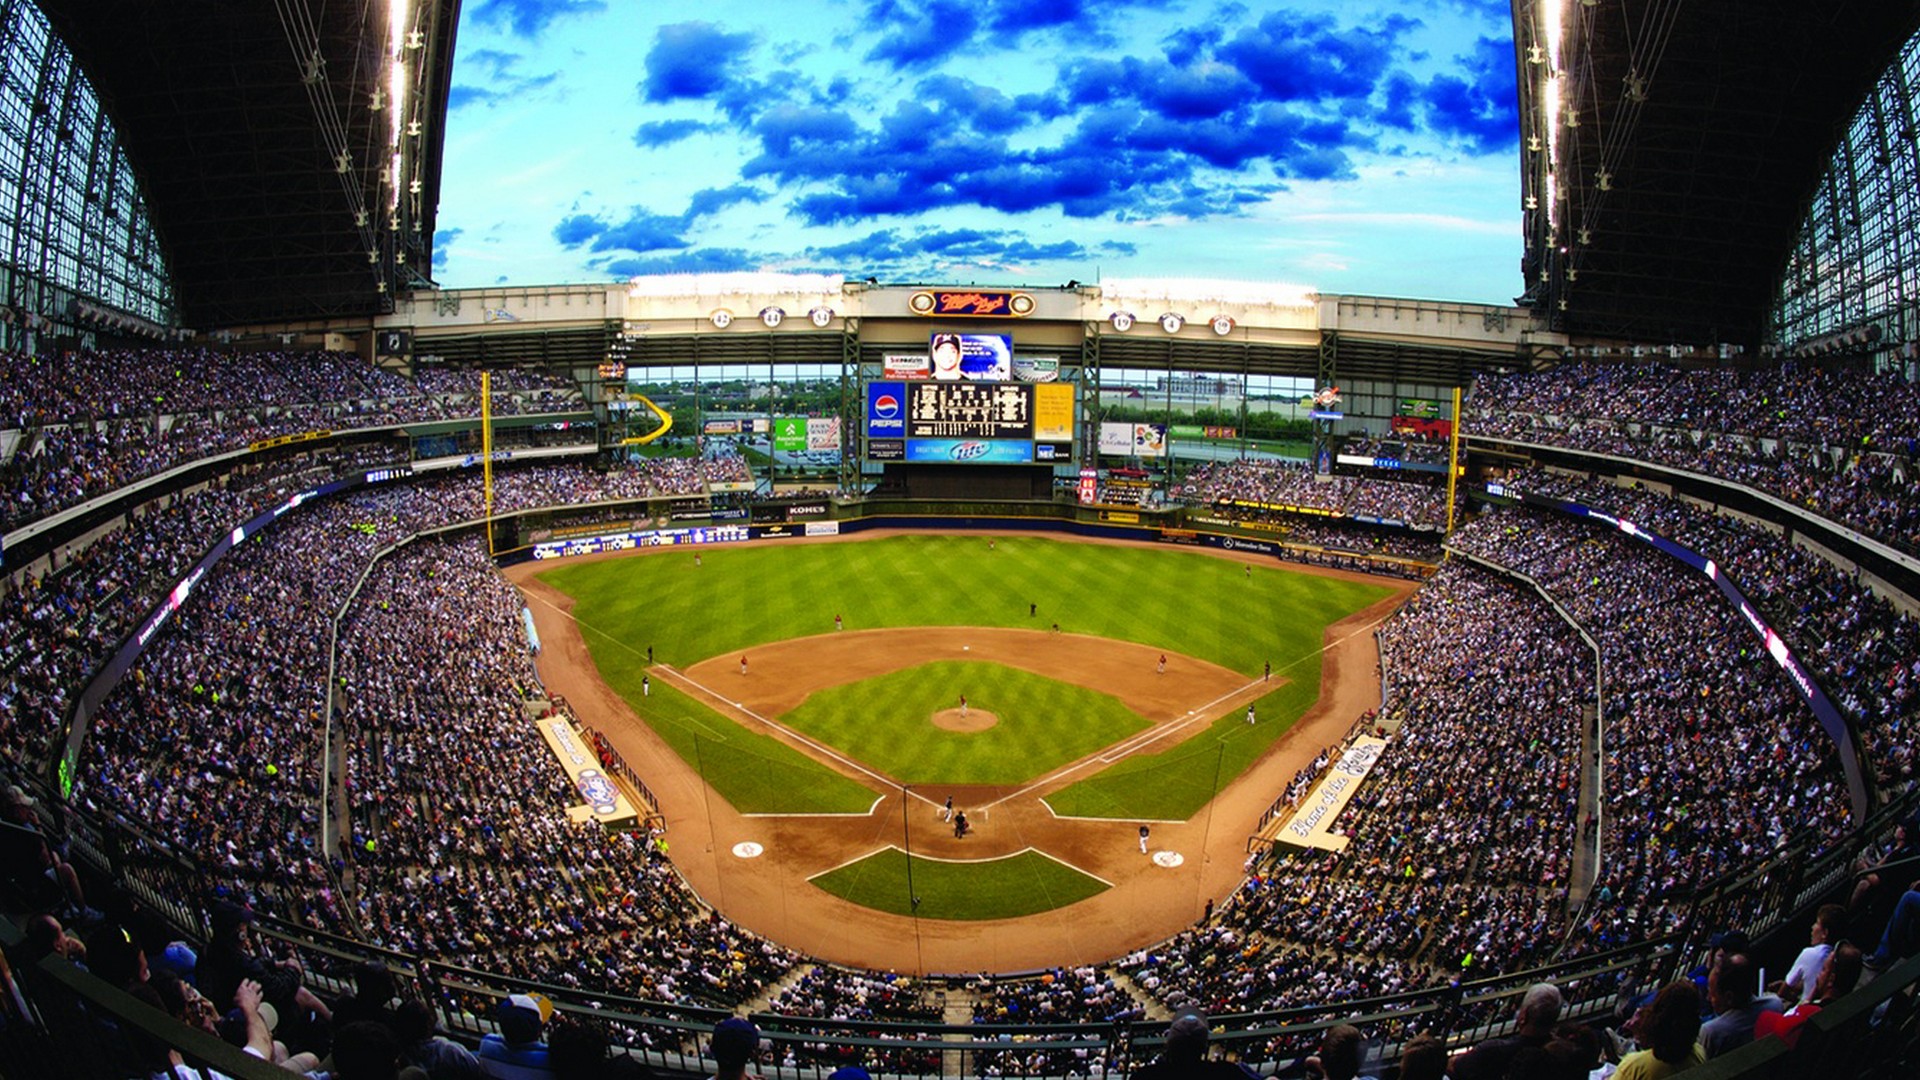 Milwaukee Brewers Stadium For Desktop Wallpaper with high-resolution 1920x1080 pixel. You can use this wallpaper for Mac Desktop Wallpaper, Laptop Screensavers, Android Wallpapers, Tablet or iPhone Home Screen and another mobile phone device